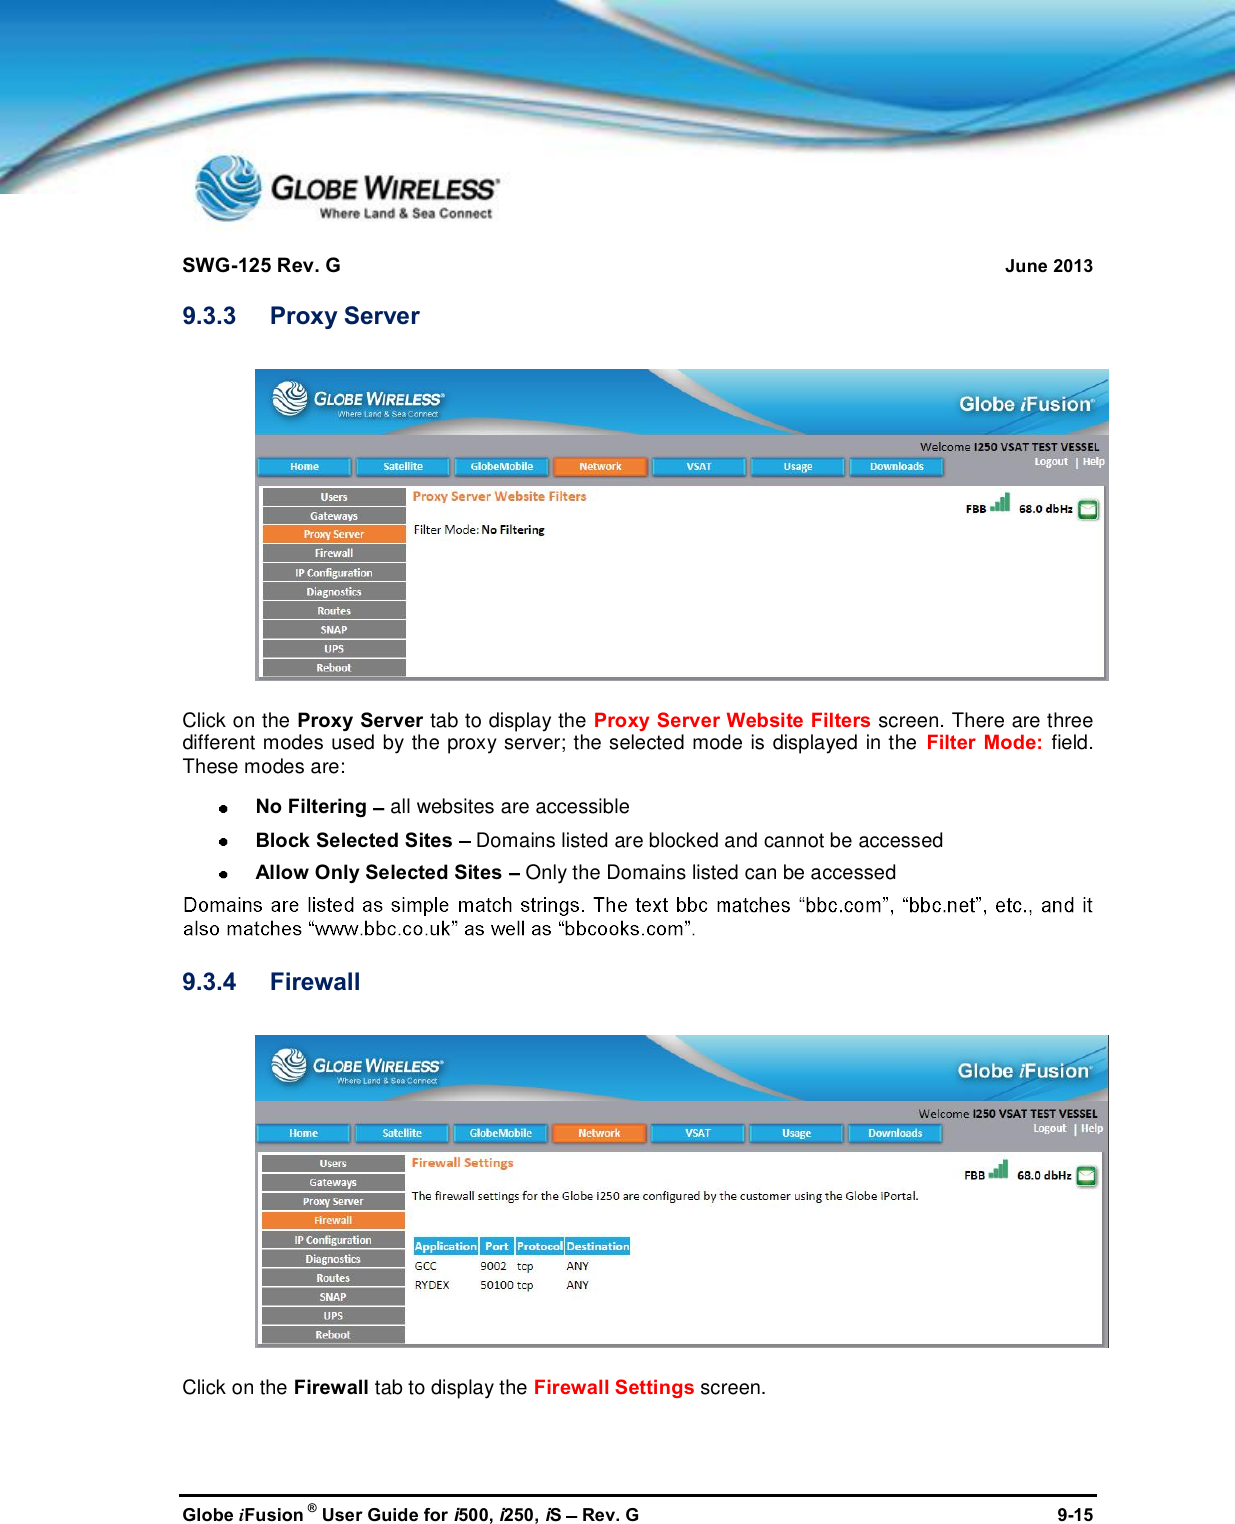 SWG-125 Rev. G June 2013Globe iFusion ®User Guide for i500, i250, iSRev. G 9-159.3.3 Proxy ServerClick on the Proxy Server tab to display the Proxy Server Website Filters screen. There are threedifferent modes used by the proxy server; the selected mode is displayed in the Filter Mode: field.These modes are:No Filtering all websites are accessibleBlock Selected Sites Domains listed are blocked and cannot be accessedAllow Only Selected Sites Only the Domains listed can be accessed9.3.4 FirewallClick on the Firewall tab to display the Firewall Settings screen.